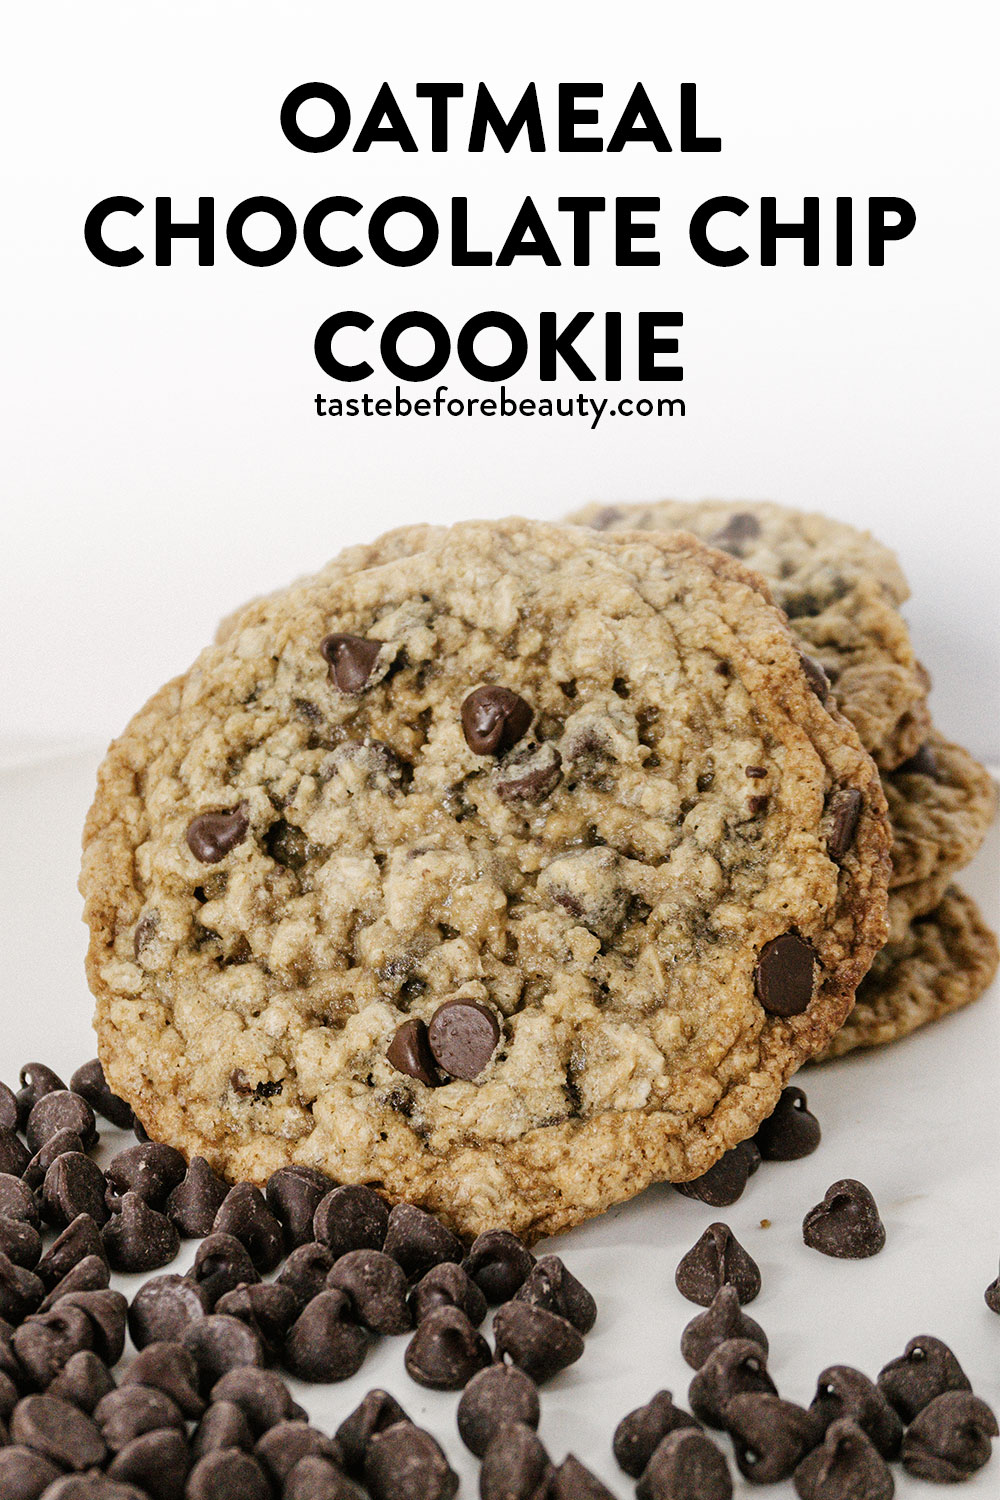 taste before beauty oatmeal chocolate chip cookie stacked on each other with chocolate chips pinterest pin